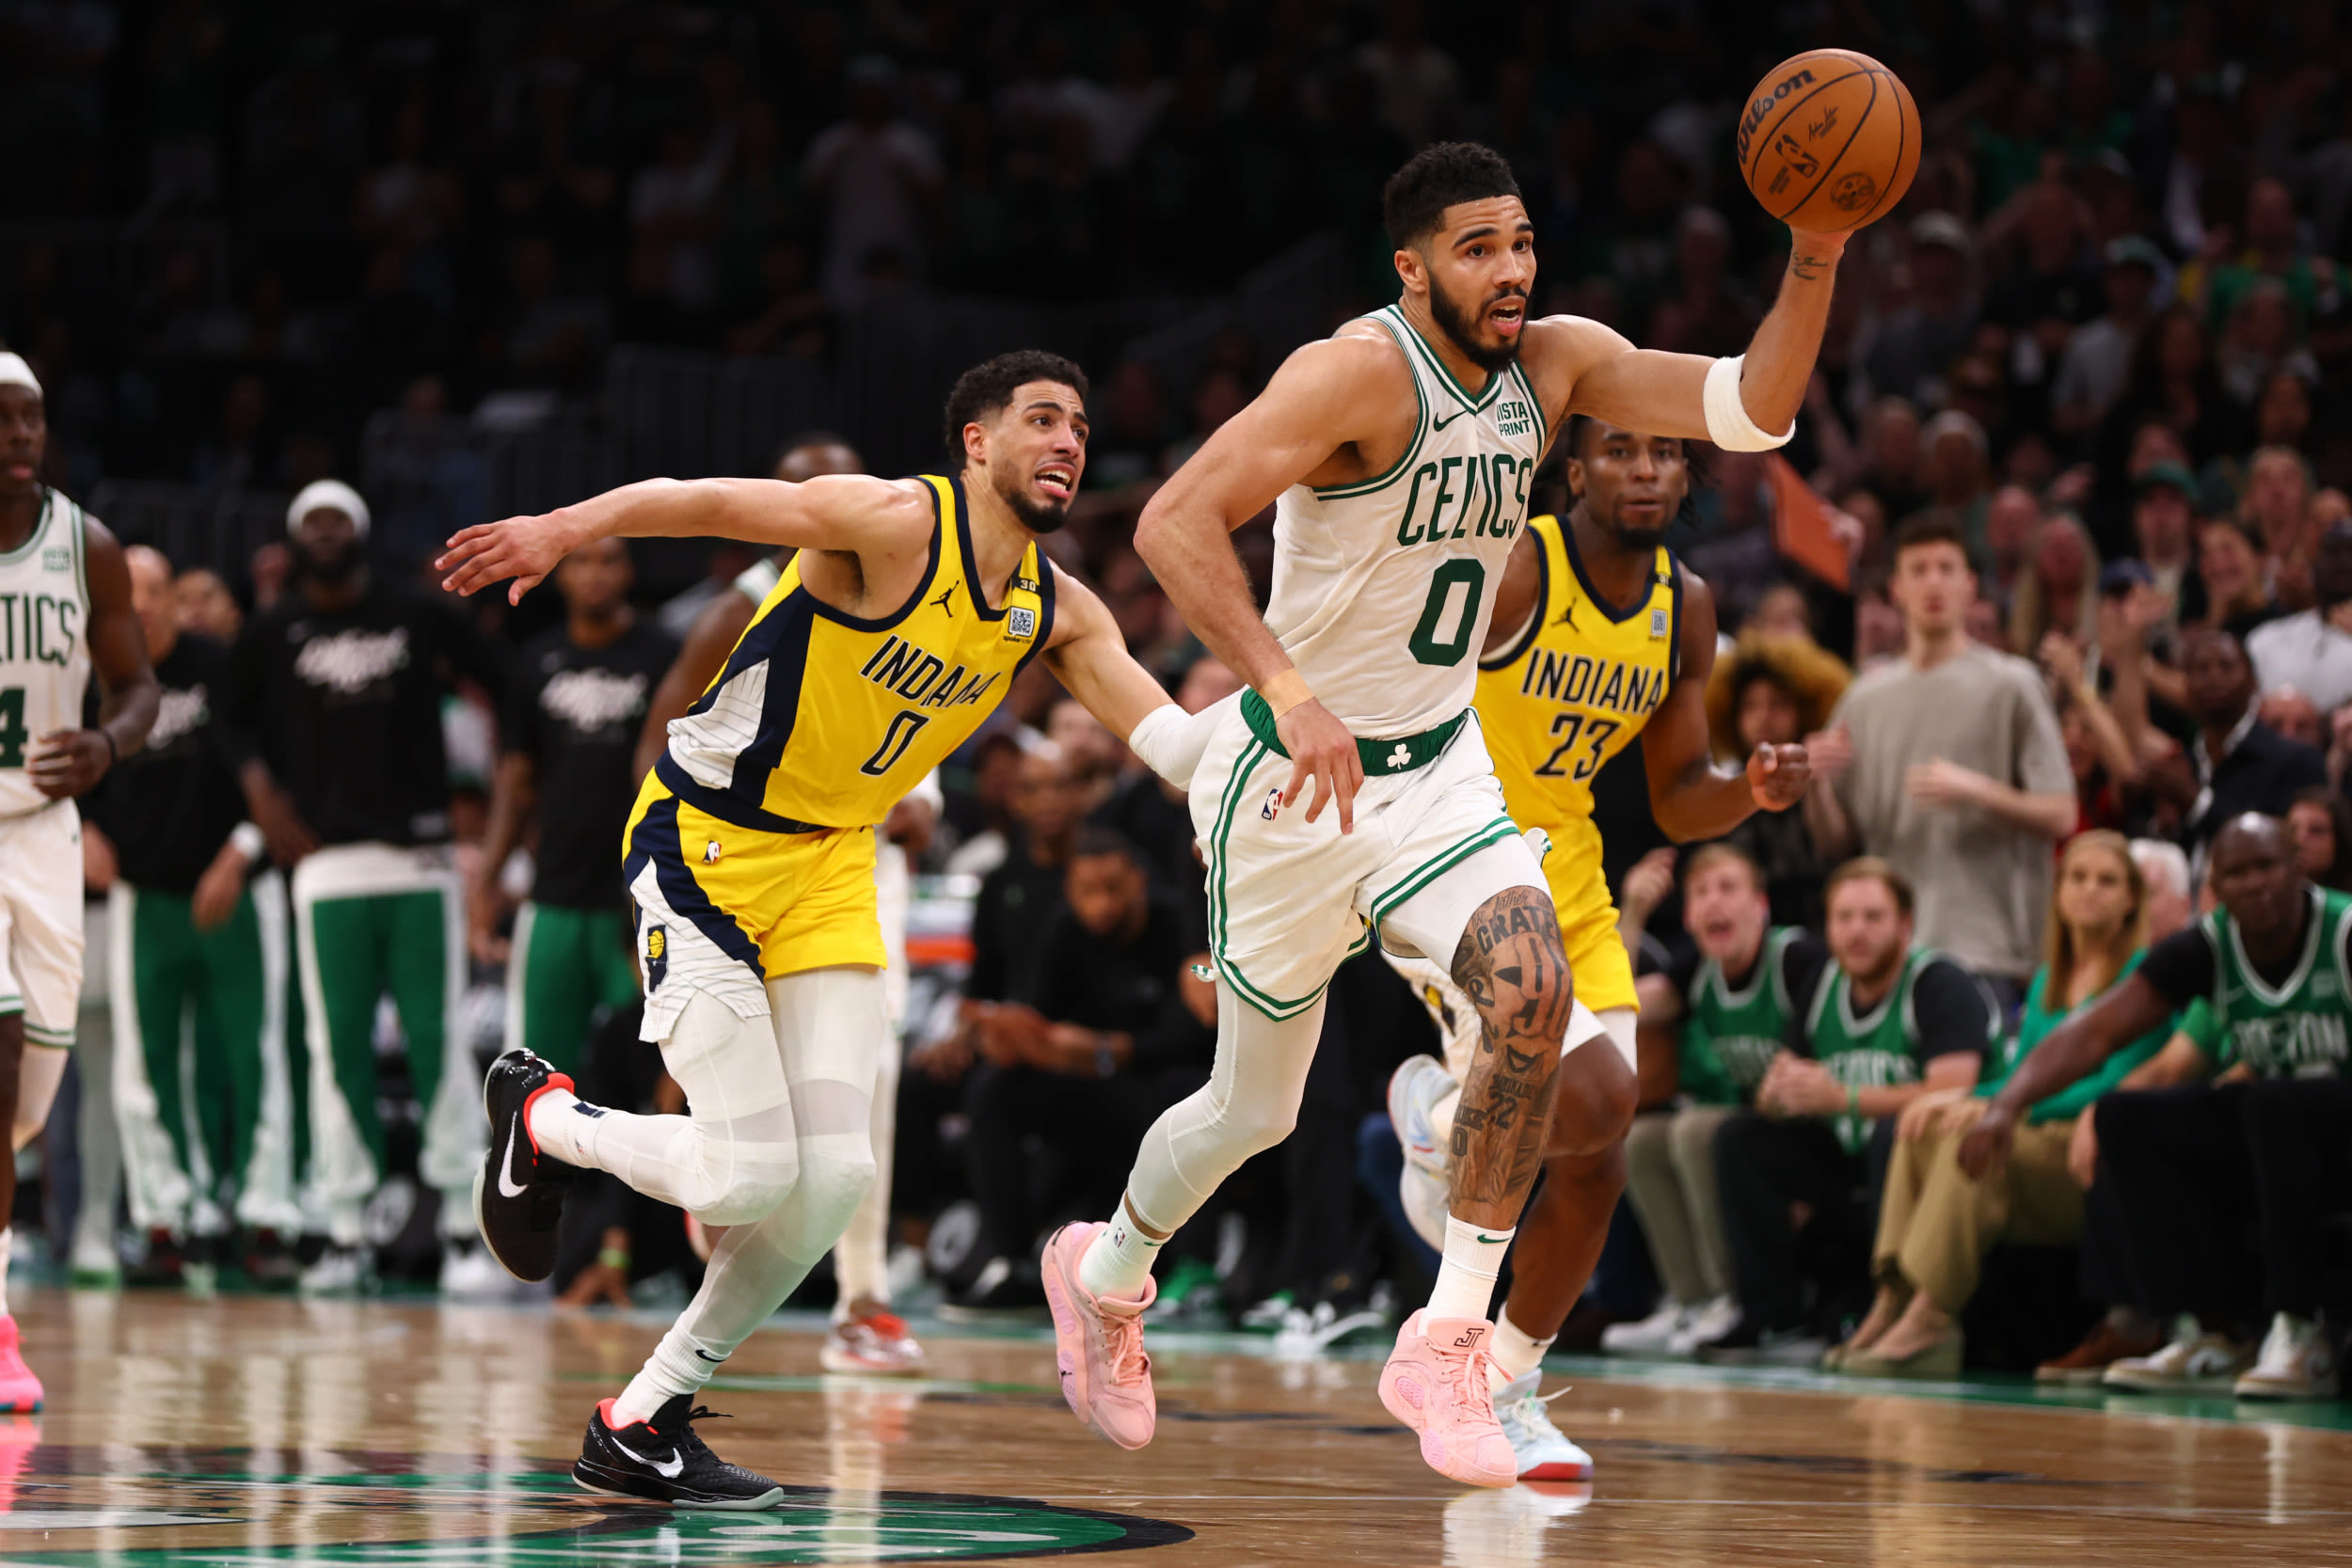 NBA Playoffs: All-Star Ruled Out for Celtics-Pacers Game 3